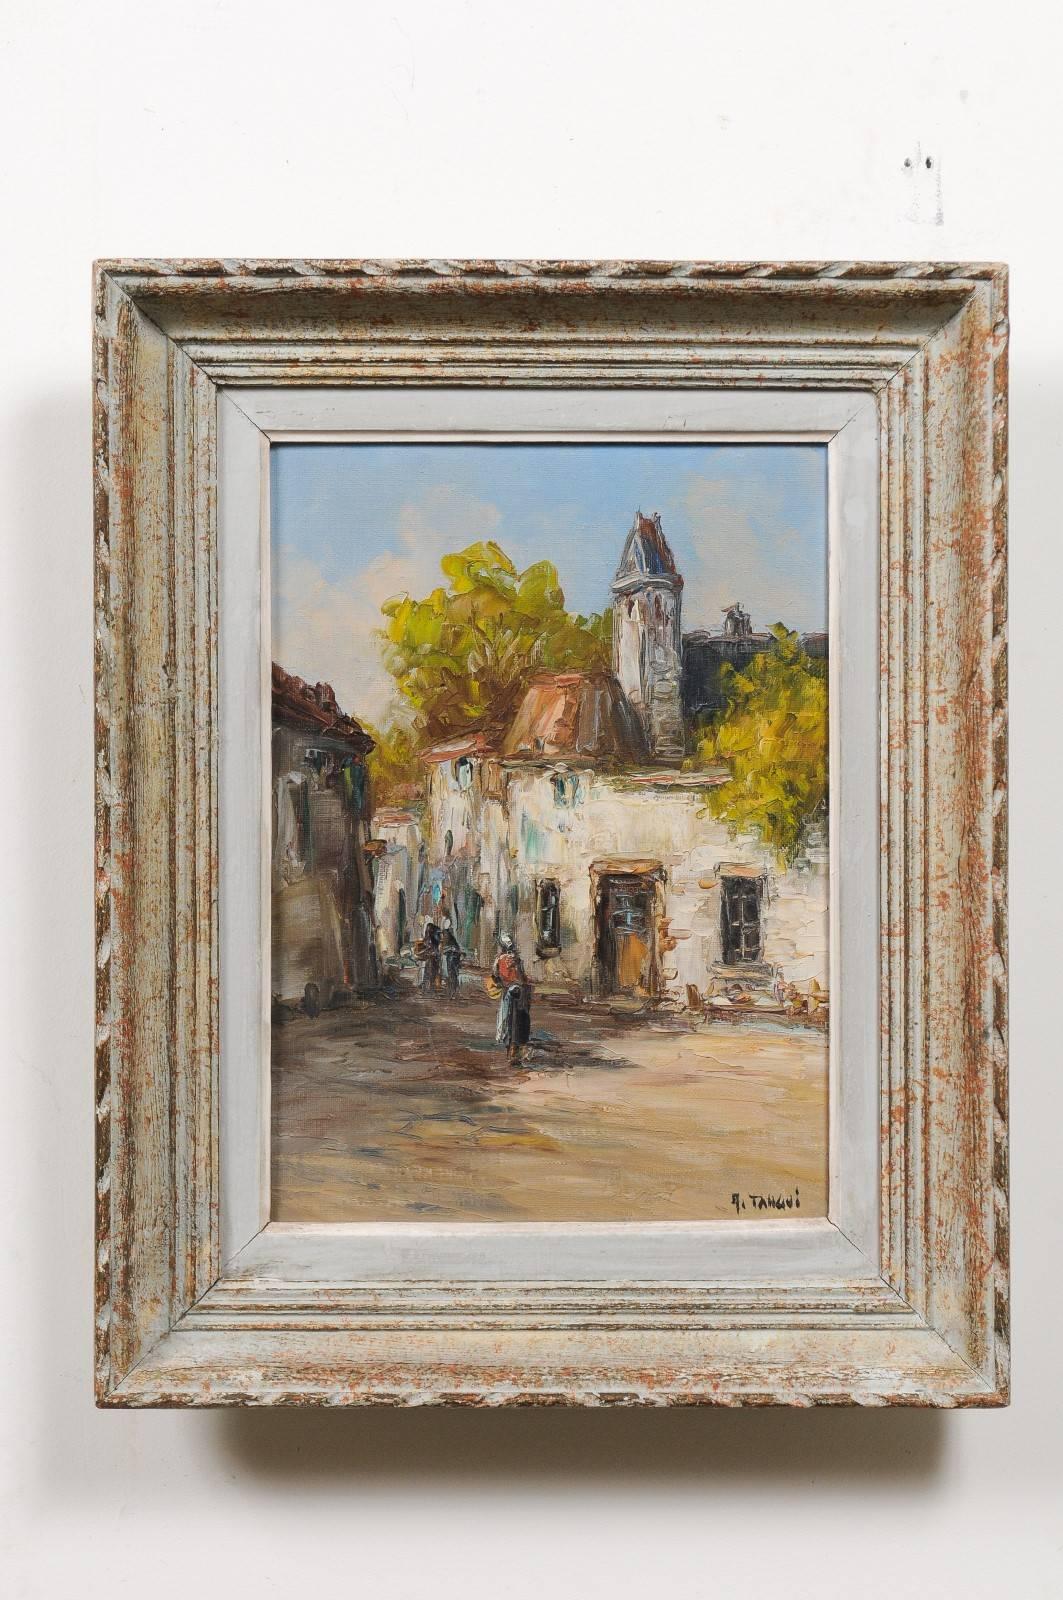 A small French framed oil on canvas painting from the late 19th century, depicting a village in Brittany and signed by artist M. Tangui. Born during the ever-changing 19th century, this charming oil painting depicts an everyday village scene, taking